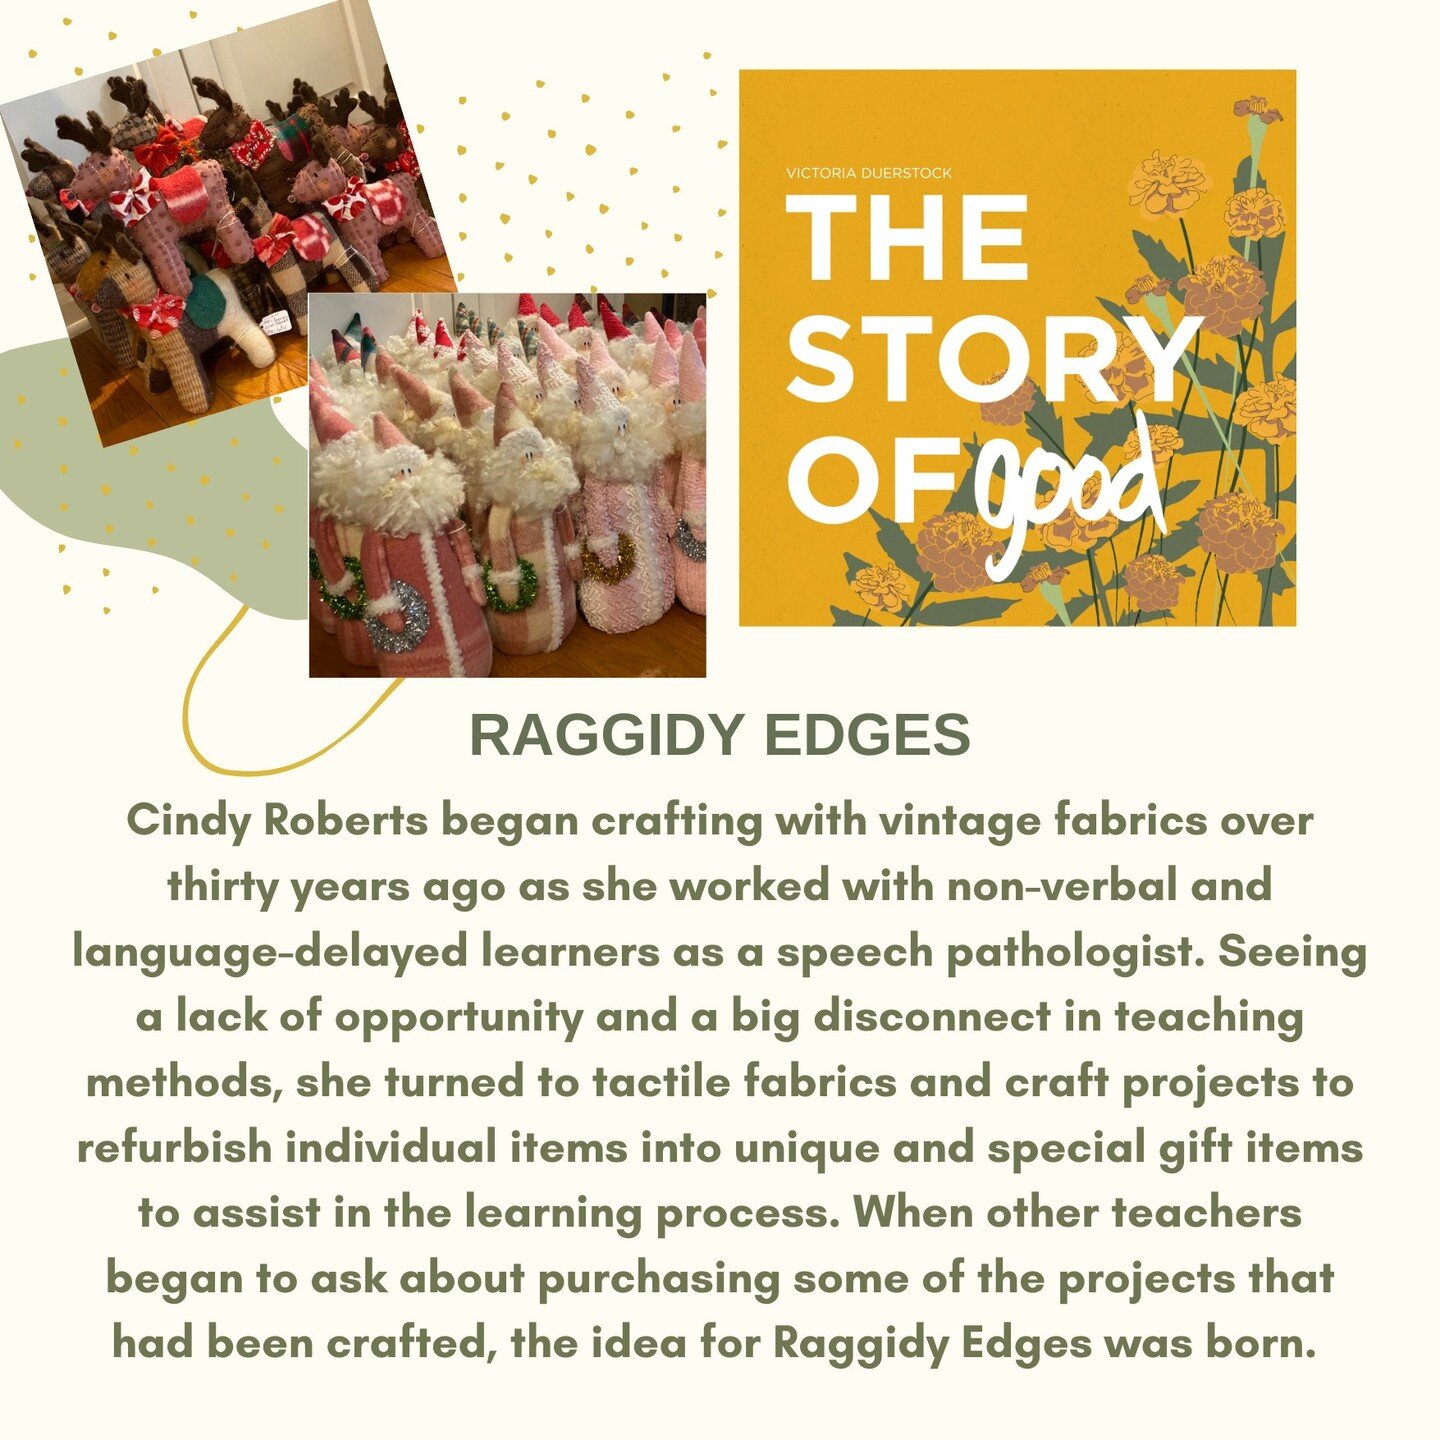 Cindy Roberts with @raggidyedges launched a dual purpose business while doing something she enjoyed. Whether you pursue a passion, a hobby, a business or even something you just love to do you can build a bigger purpose around it and help others. 
Le